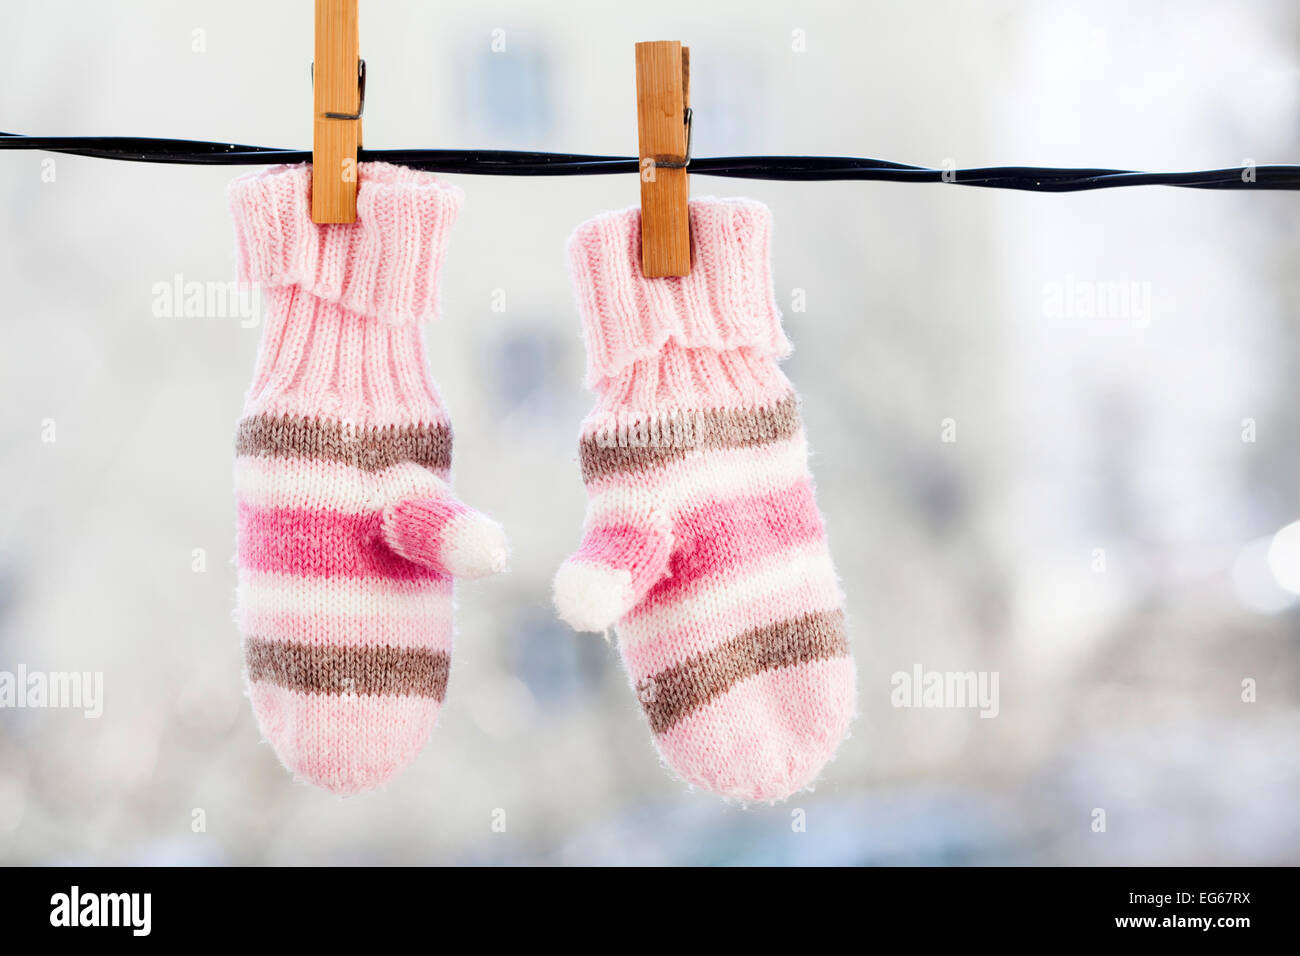 Baby gloves hanging on the clothesline. Stock Photo